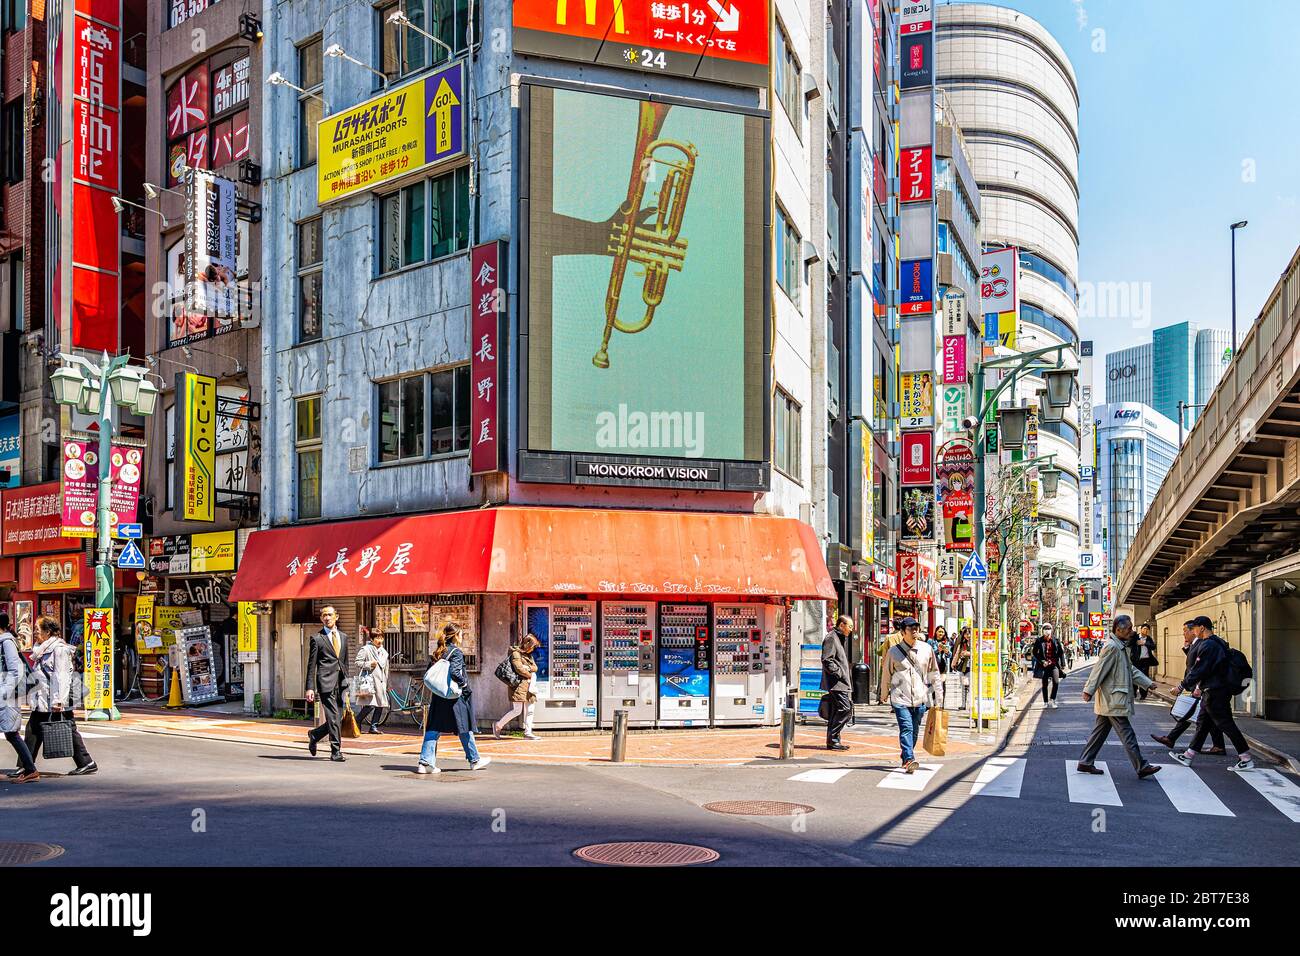 Tokyo, Japan - April 2, 2019: Shinjuku colorful red buildings with people crossing street road during day with sign for Mcdonalds fast food restaurant Stock Photo